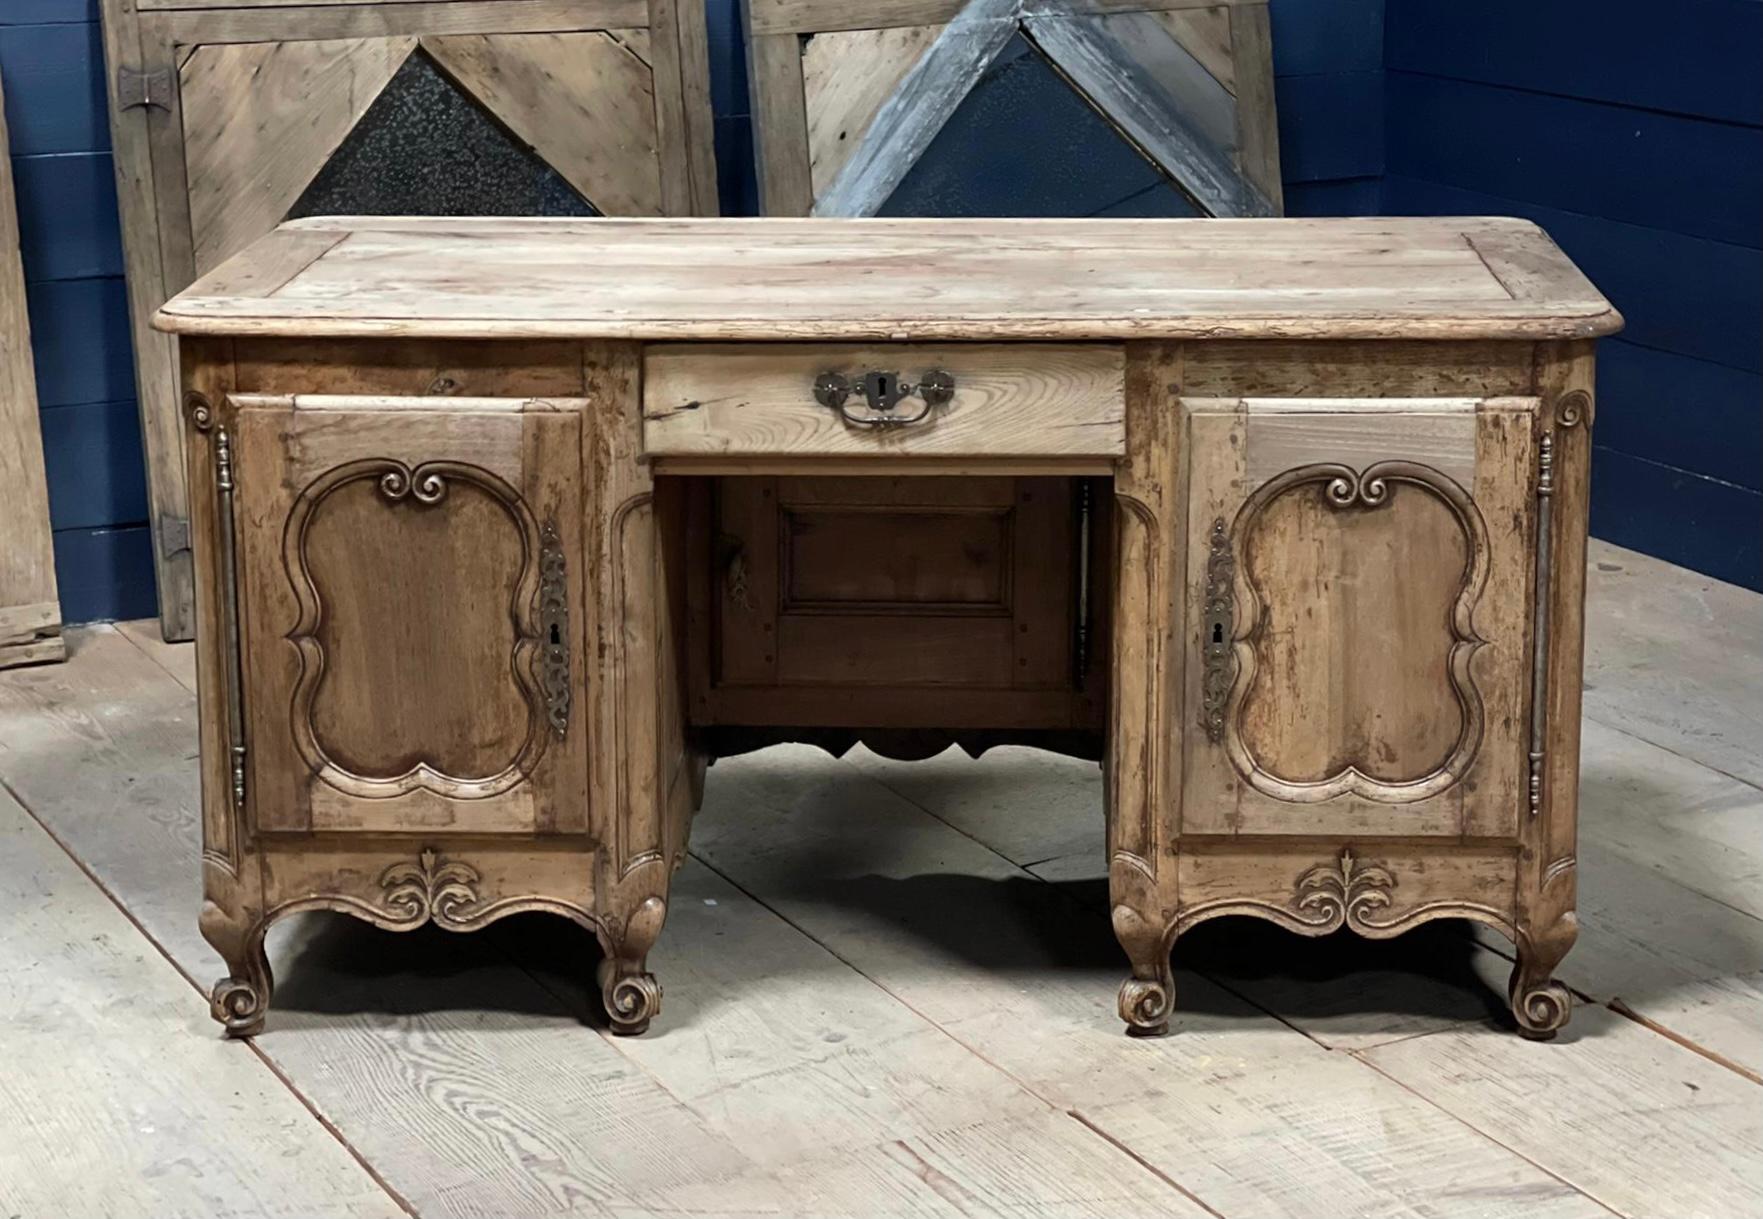 A stunning 18th Century Desk. Made from solid Cherry having 2 cupboards and a central drawer, key present. Finished round the back so can be free standing in a room.
Highly decorative, very practical and would look stunning in the right